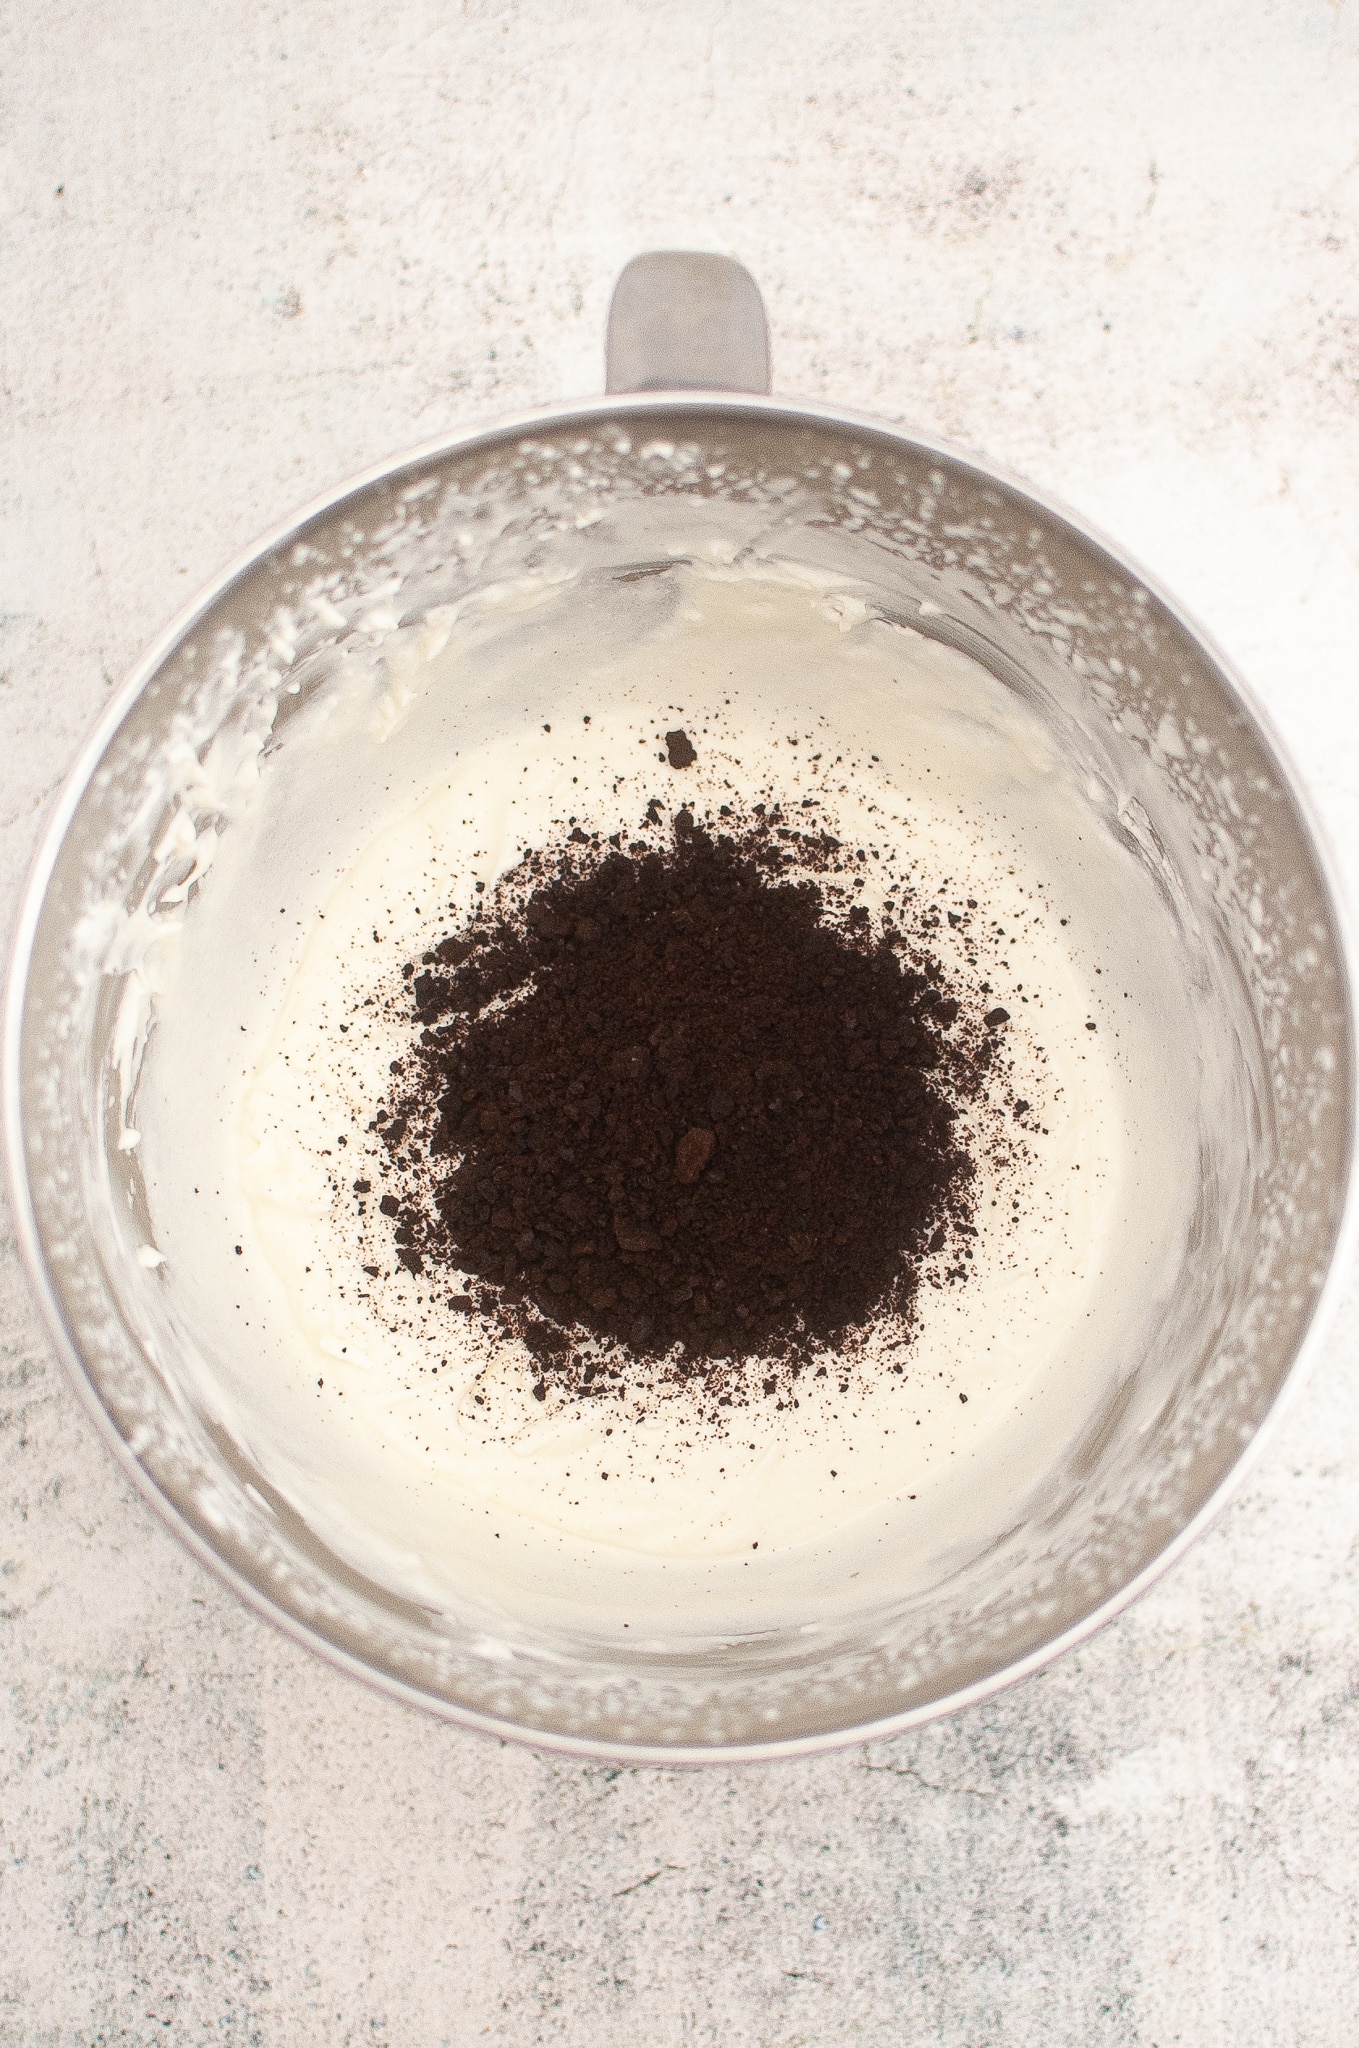 oreo cookie crumbs sitting on whipped cream in a metal mixing bowl